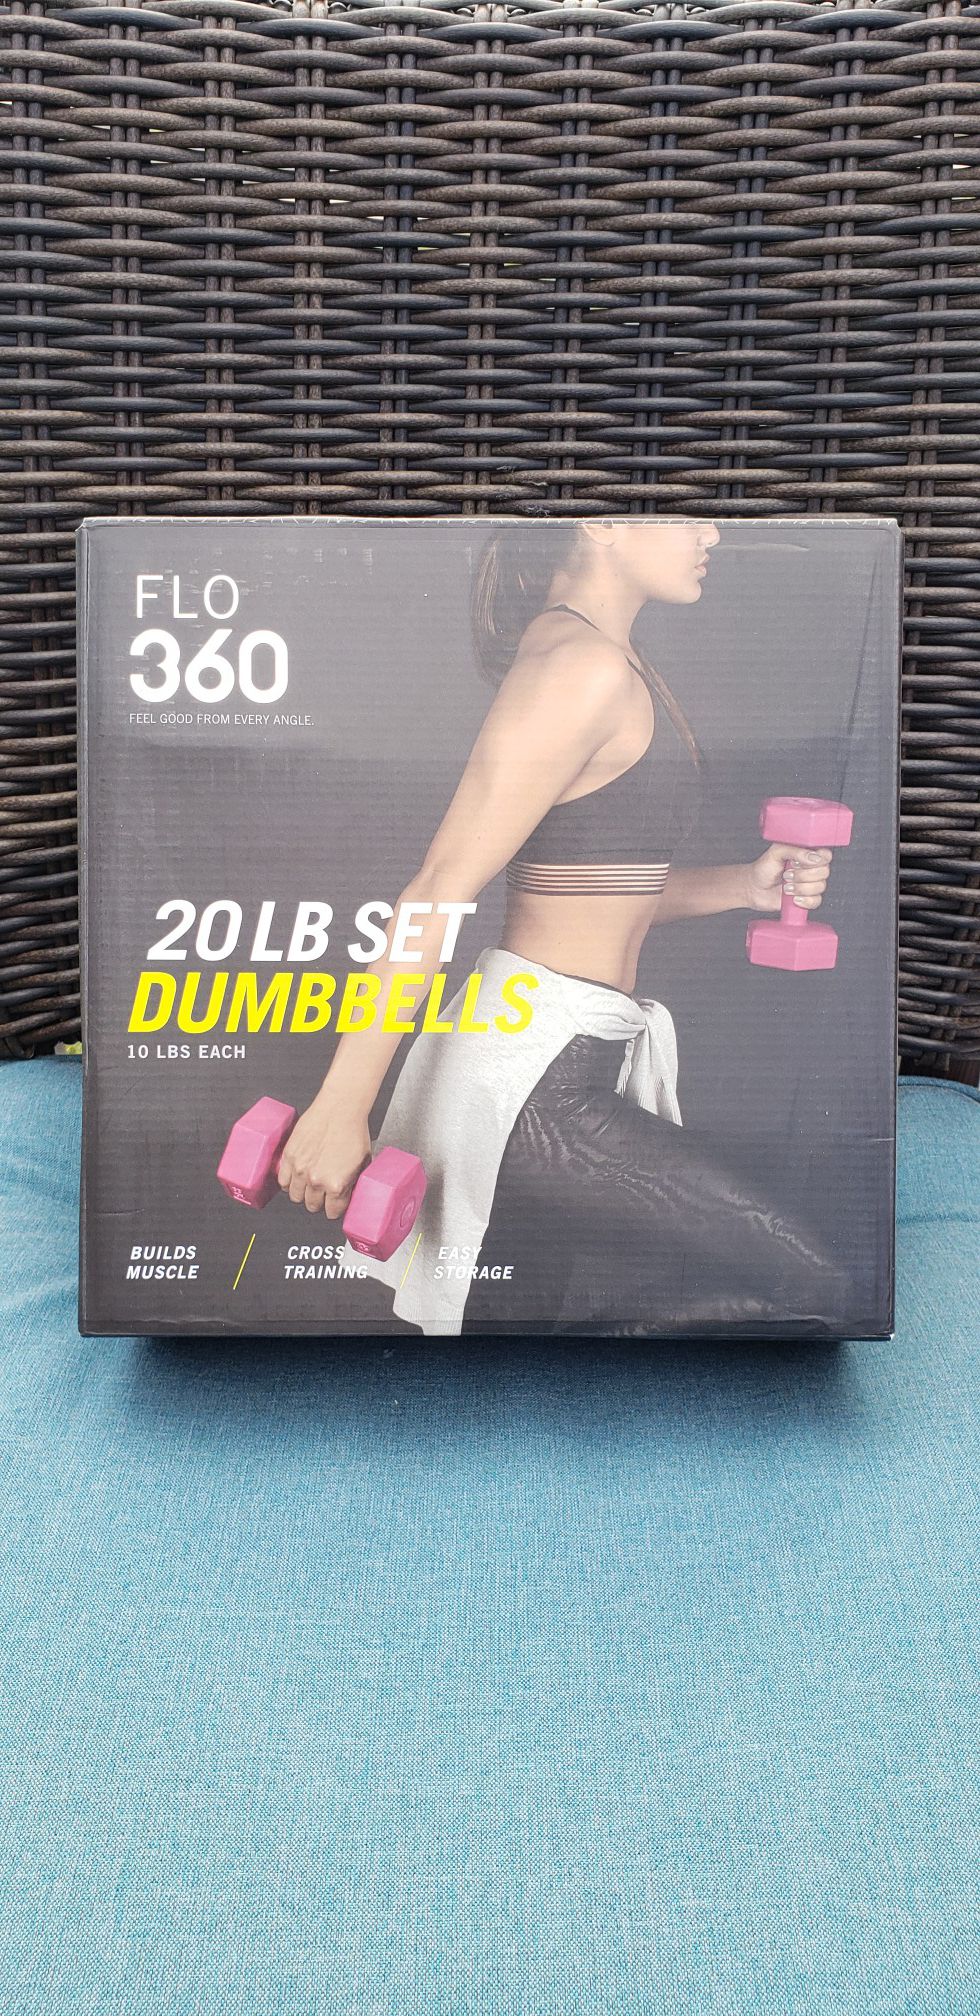 Pair Dumbbell 20lbs Total $20 (New)